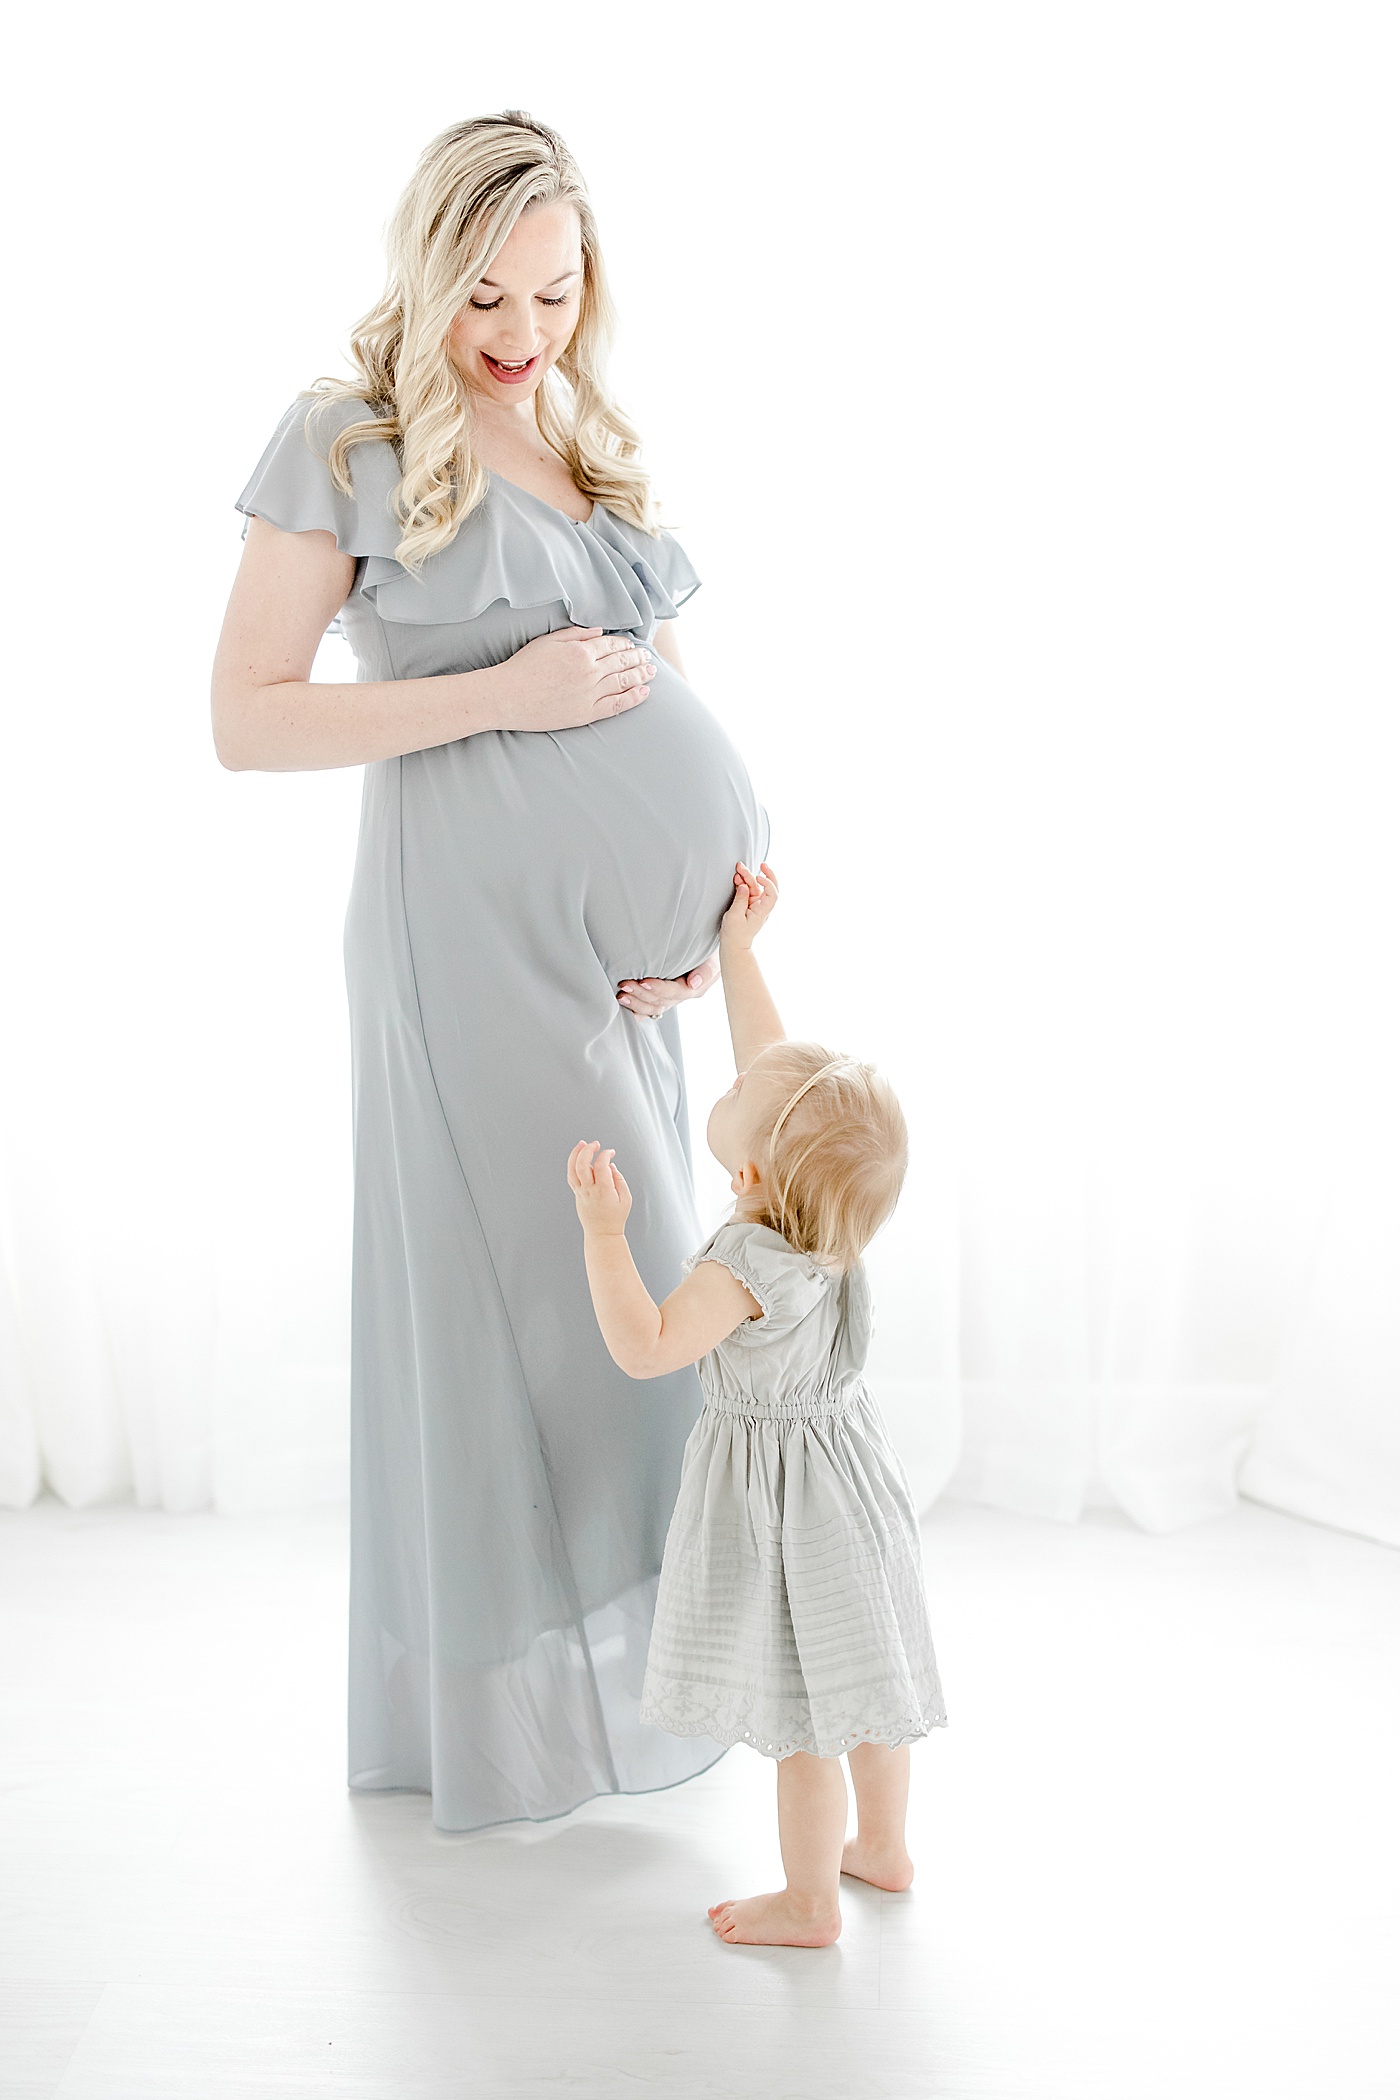 5 Reasons Why You Should Take Maternity Photos | Toddler reaching up and touching moms pregnant belly | Kristin Wood Photography